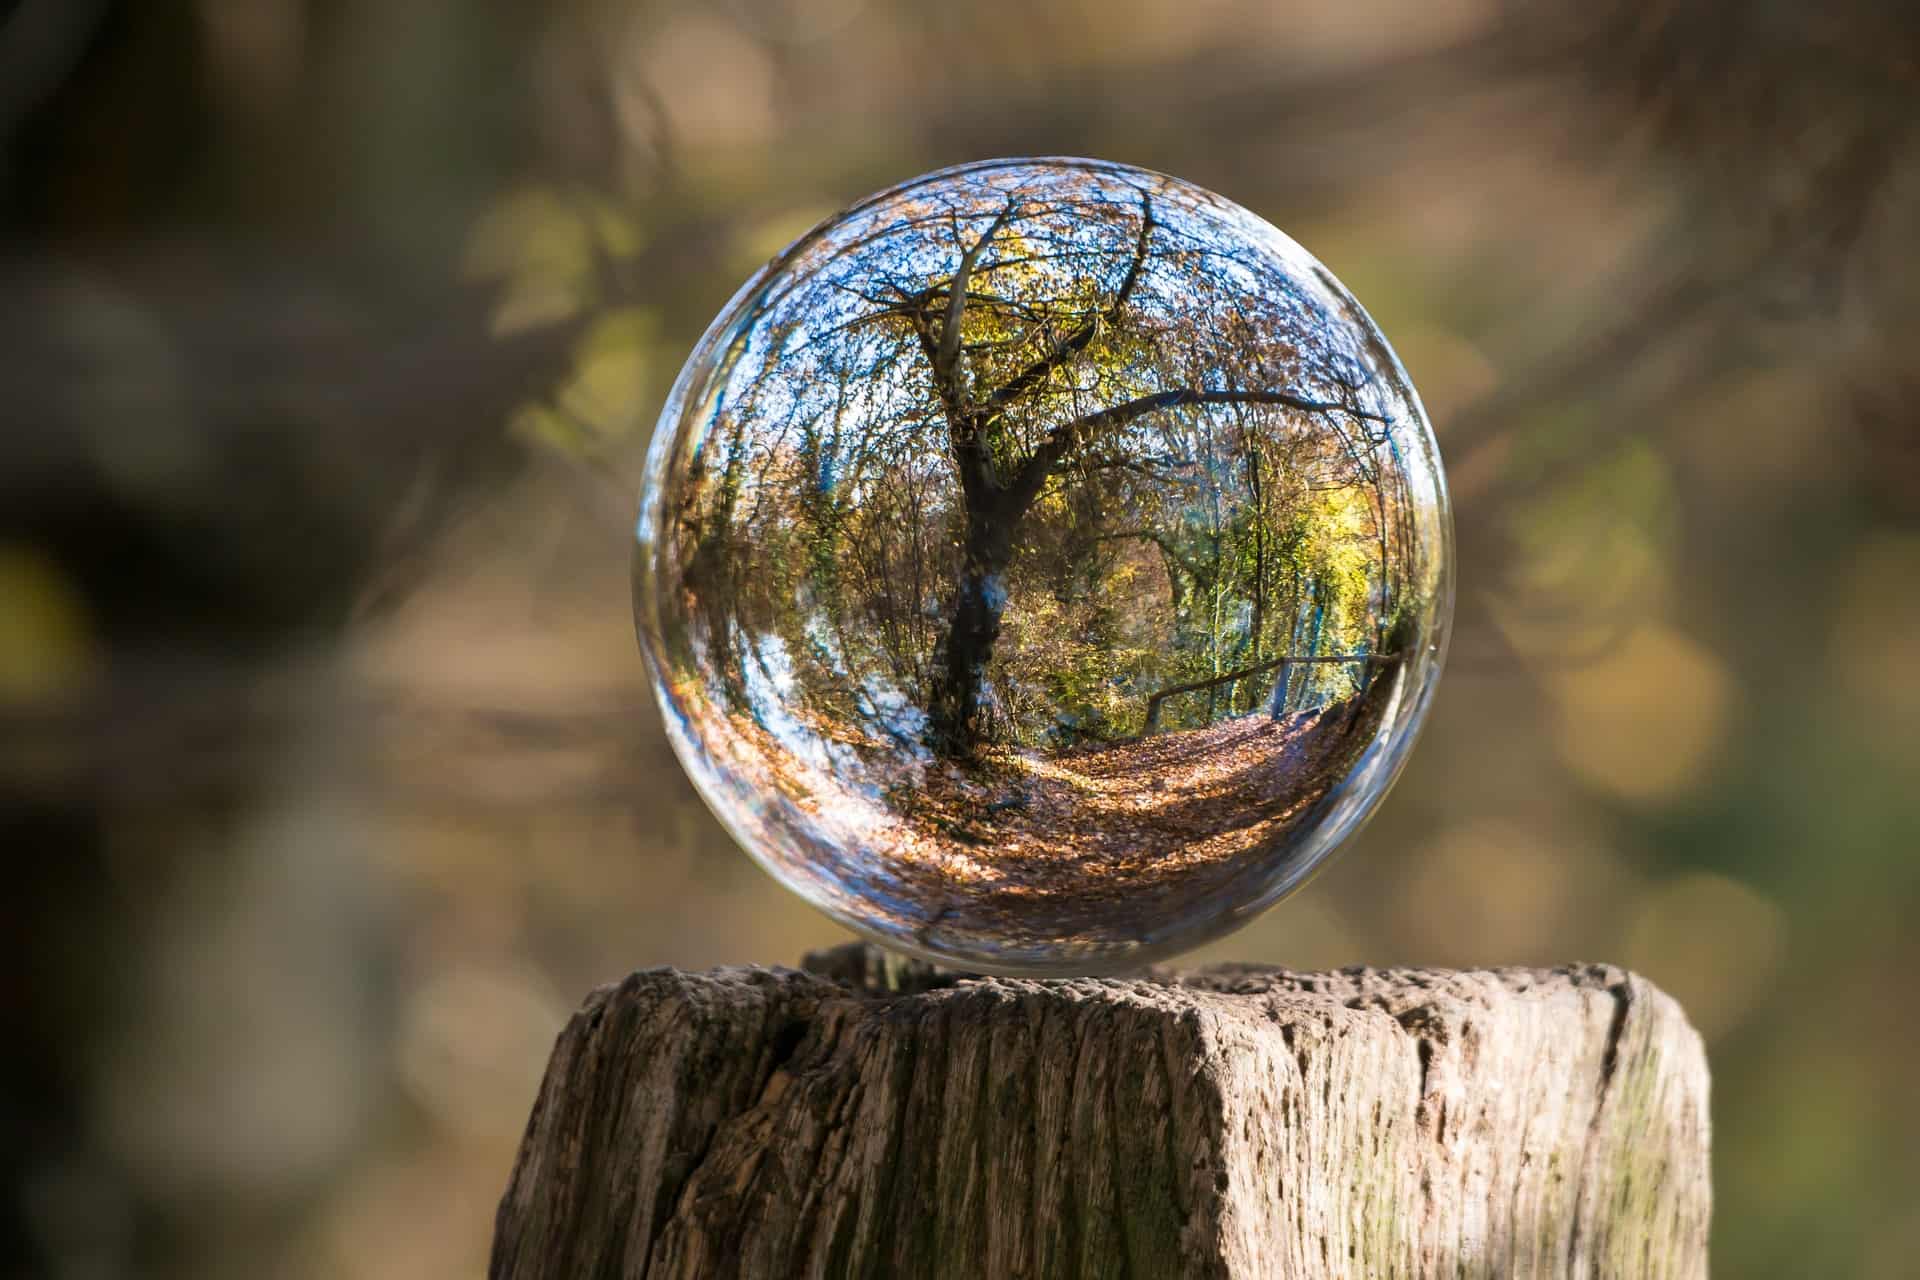 Crystal ball on a fence post in which we see a tree